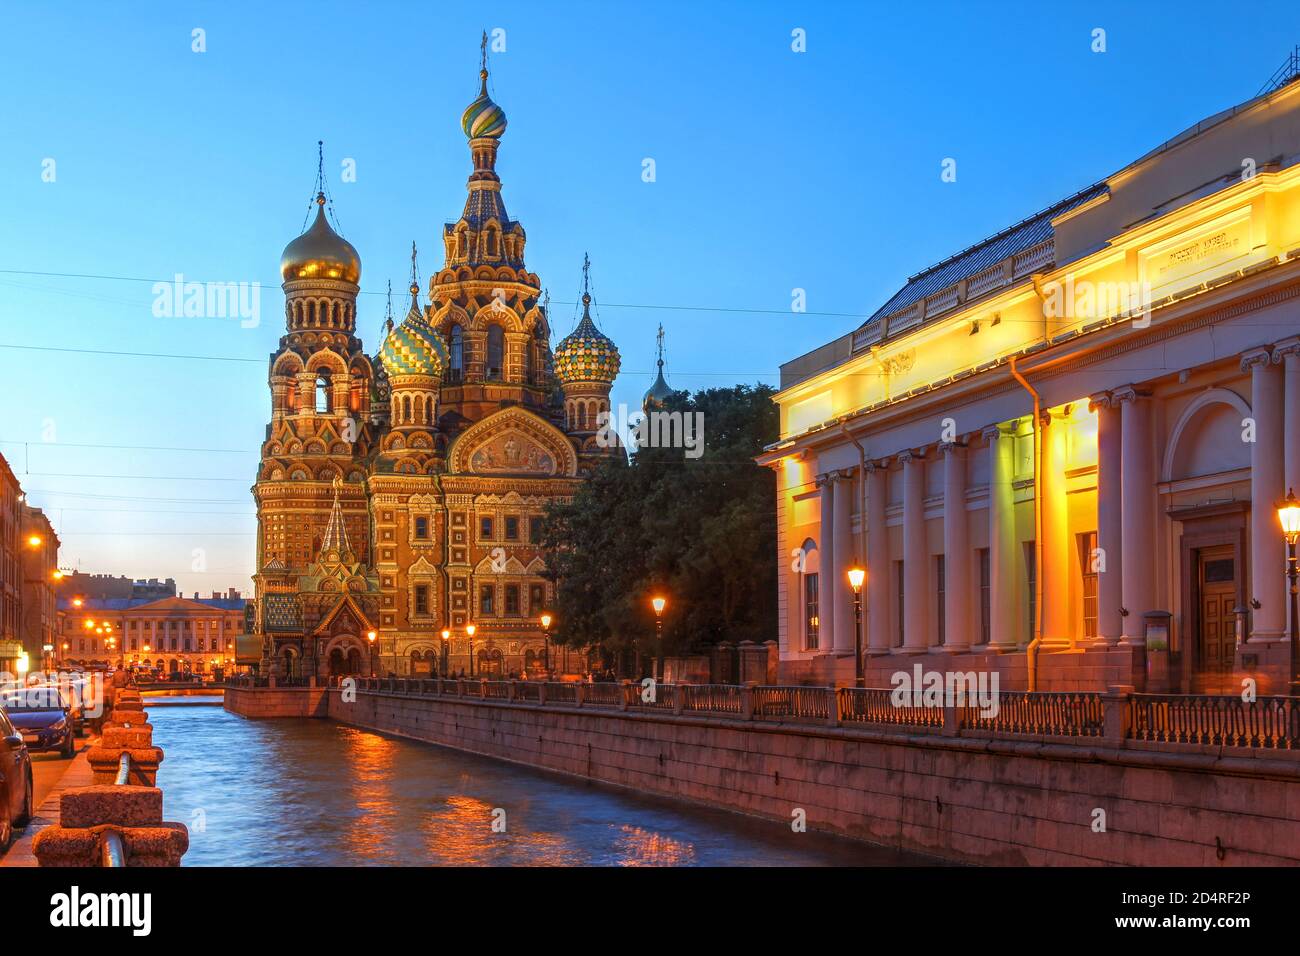 Night scene along the Griboedova Canal with Church on Spilled Blood (or Resurrection Church of Our Saviour) in St Petersburg, Russia Stock Photo